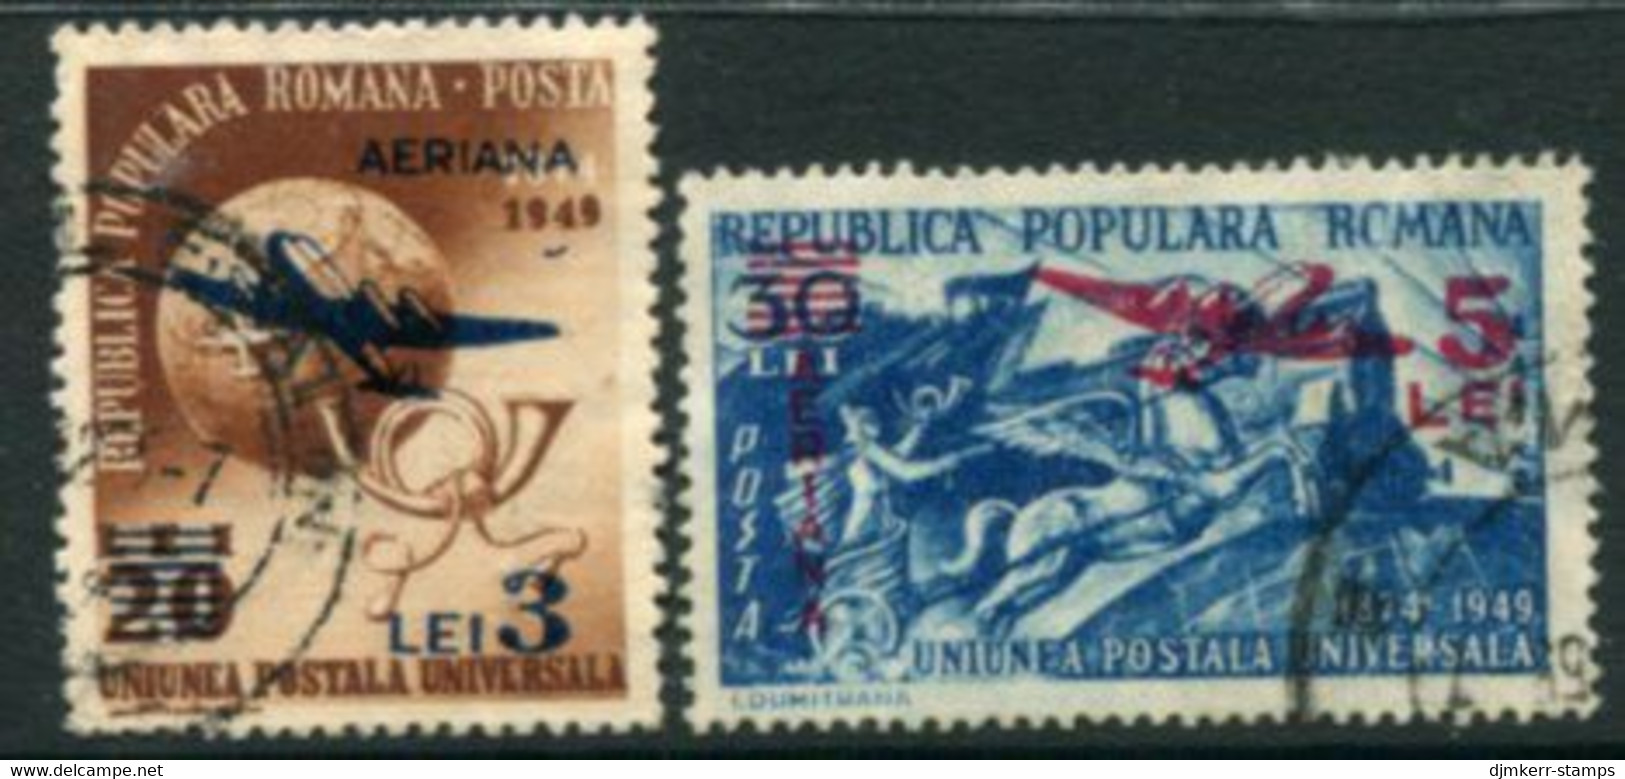 ROMANIA 1952 Currency Reform Surcharge On UPU. Airmail Used.  Michel 1365-66 - Used Stamps